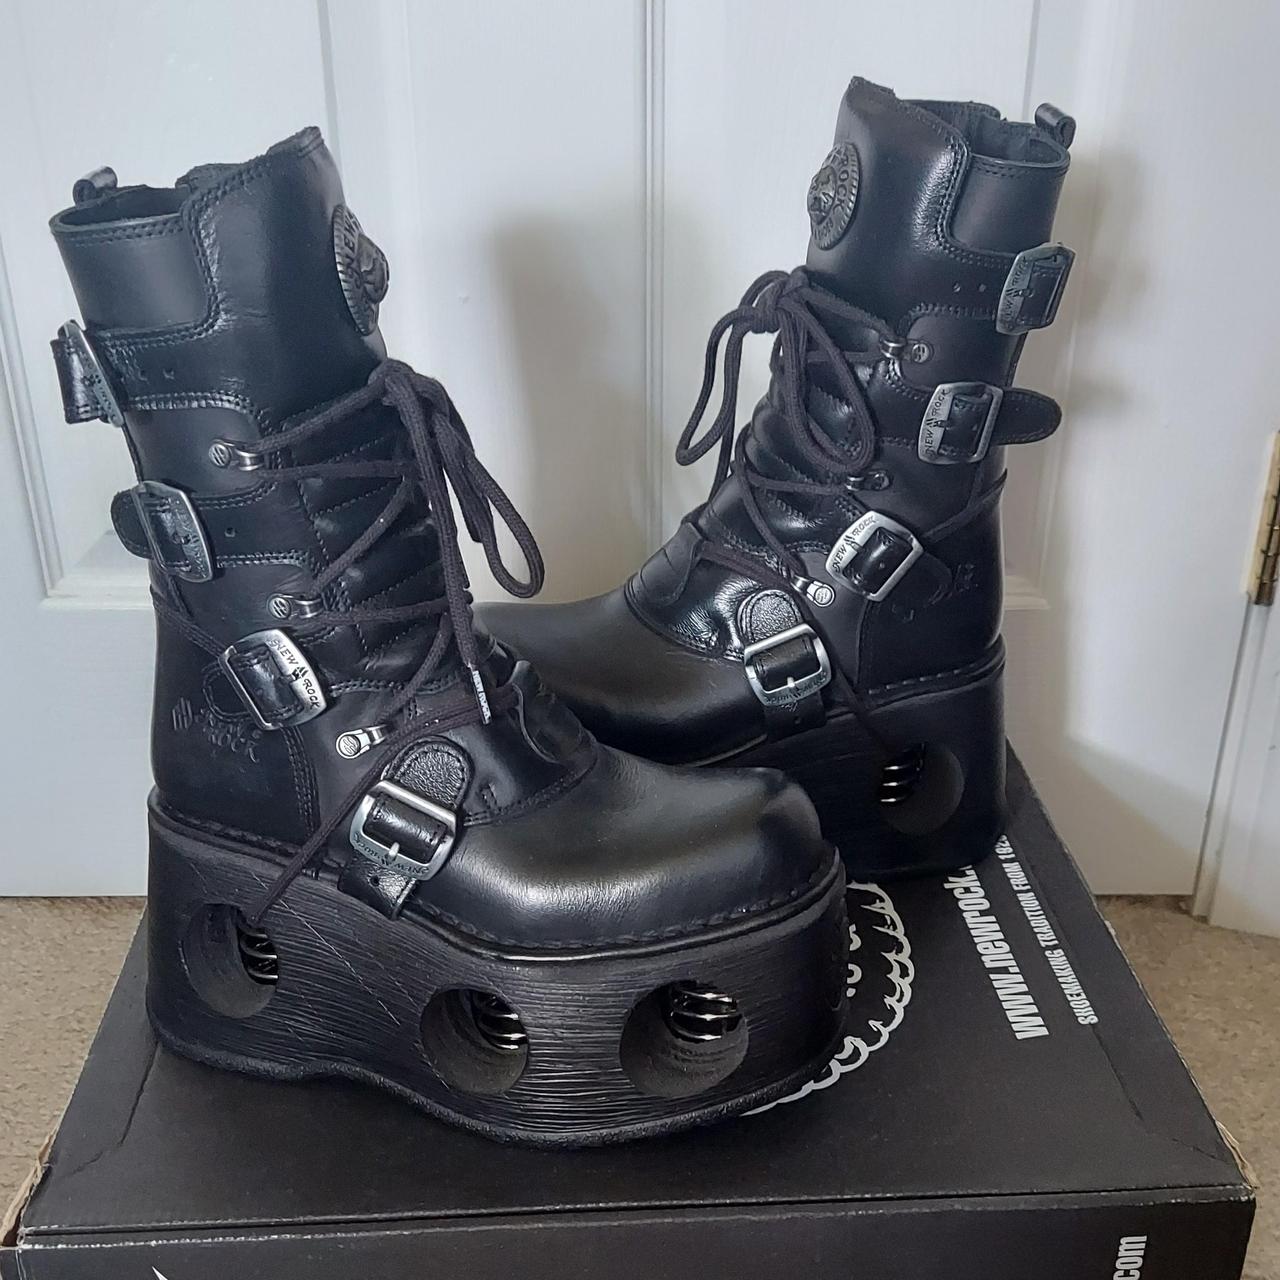 New Rock Neptuno Boots Sz 39W or 8W Made in Spain,... - Depop